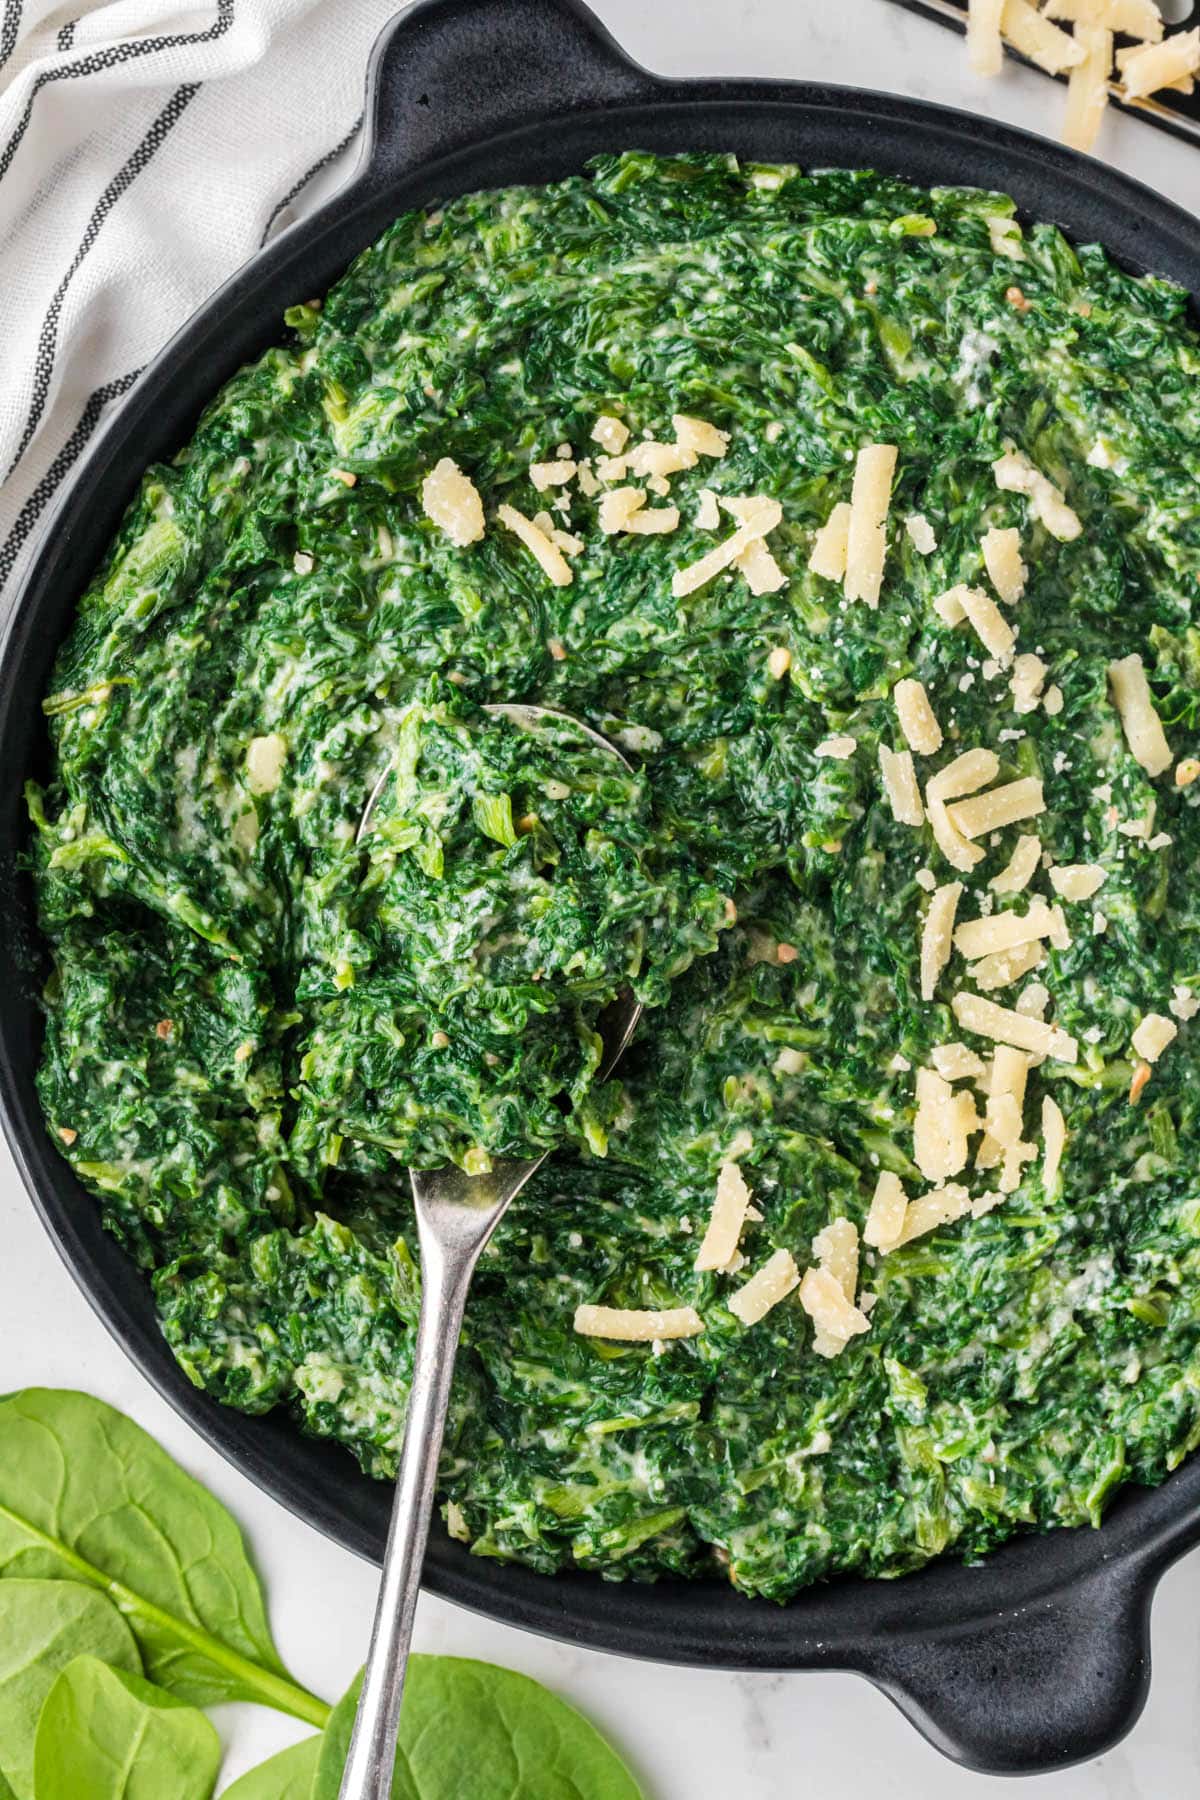 Skillet filled with creamed spinach topped with shaved parmesan cheese. With a serving spoon.